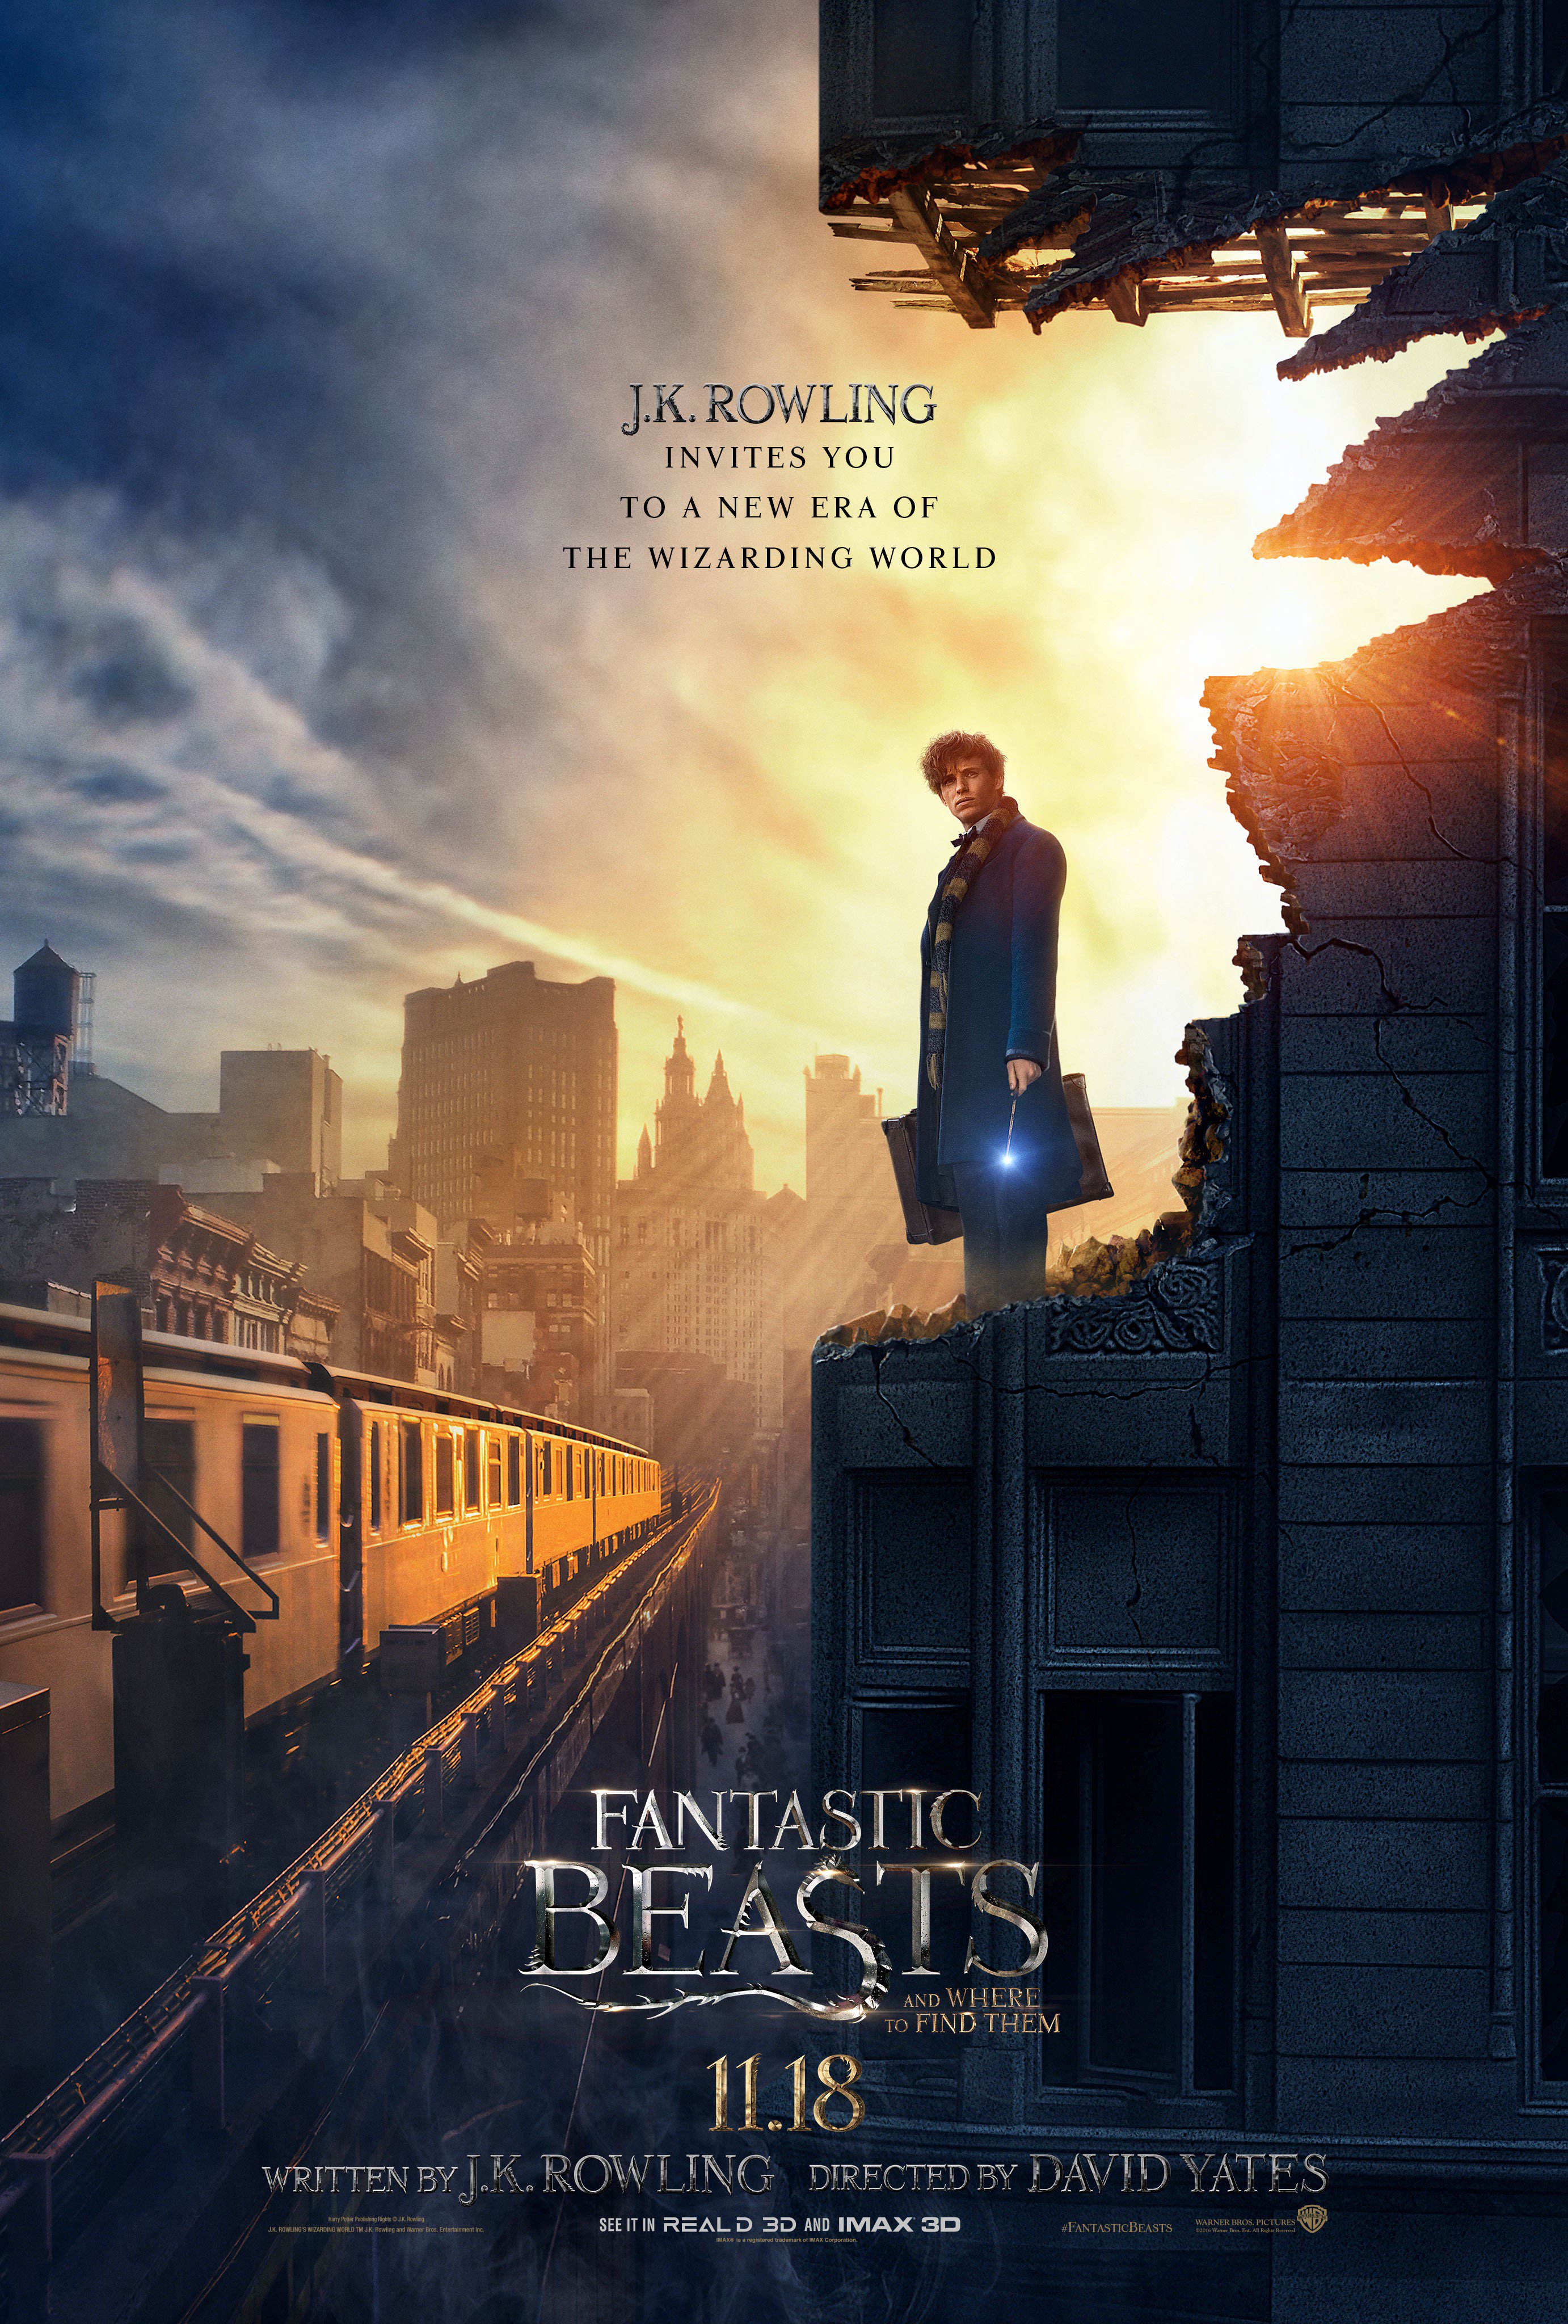 Fantastic Beasts & Where to Find Them (2016)